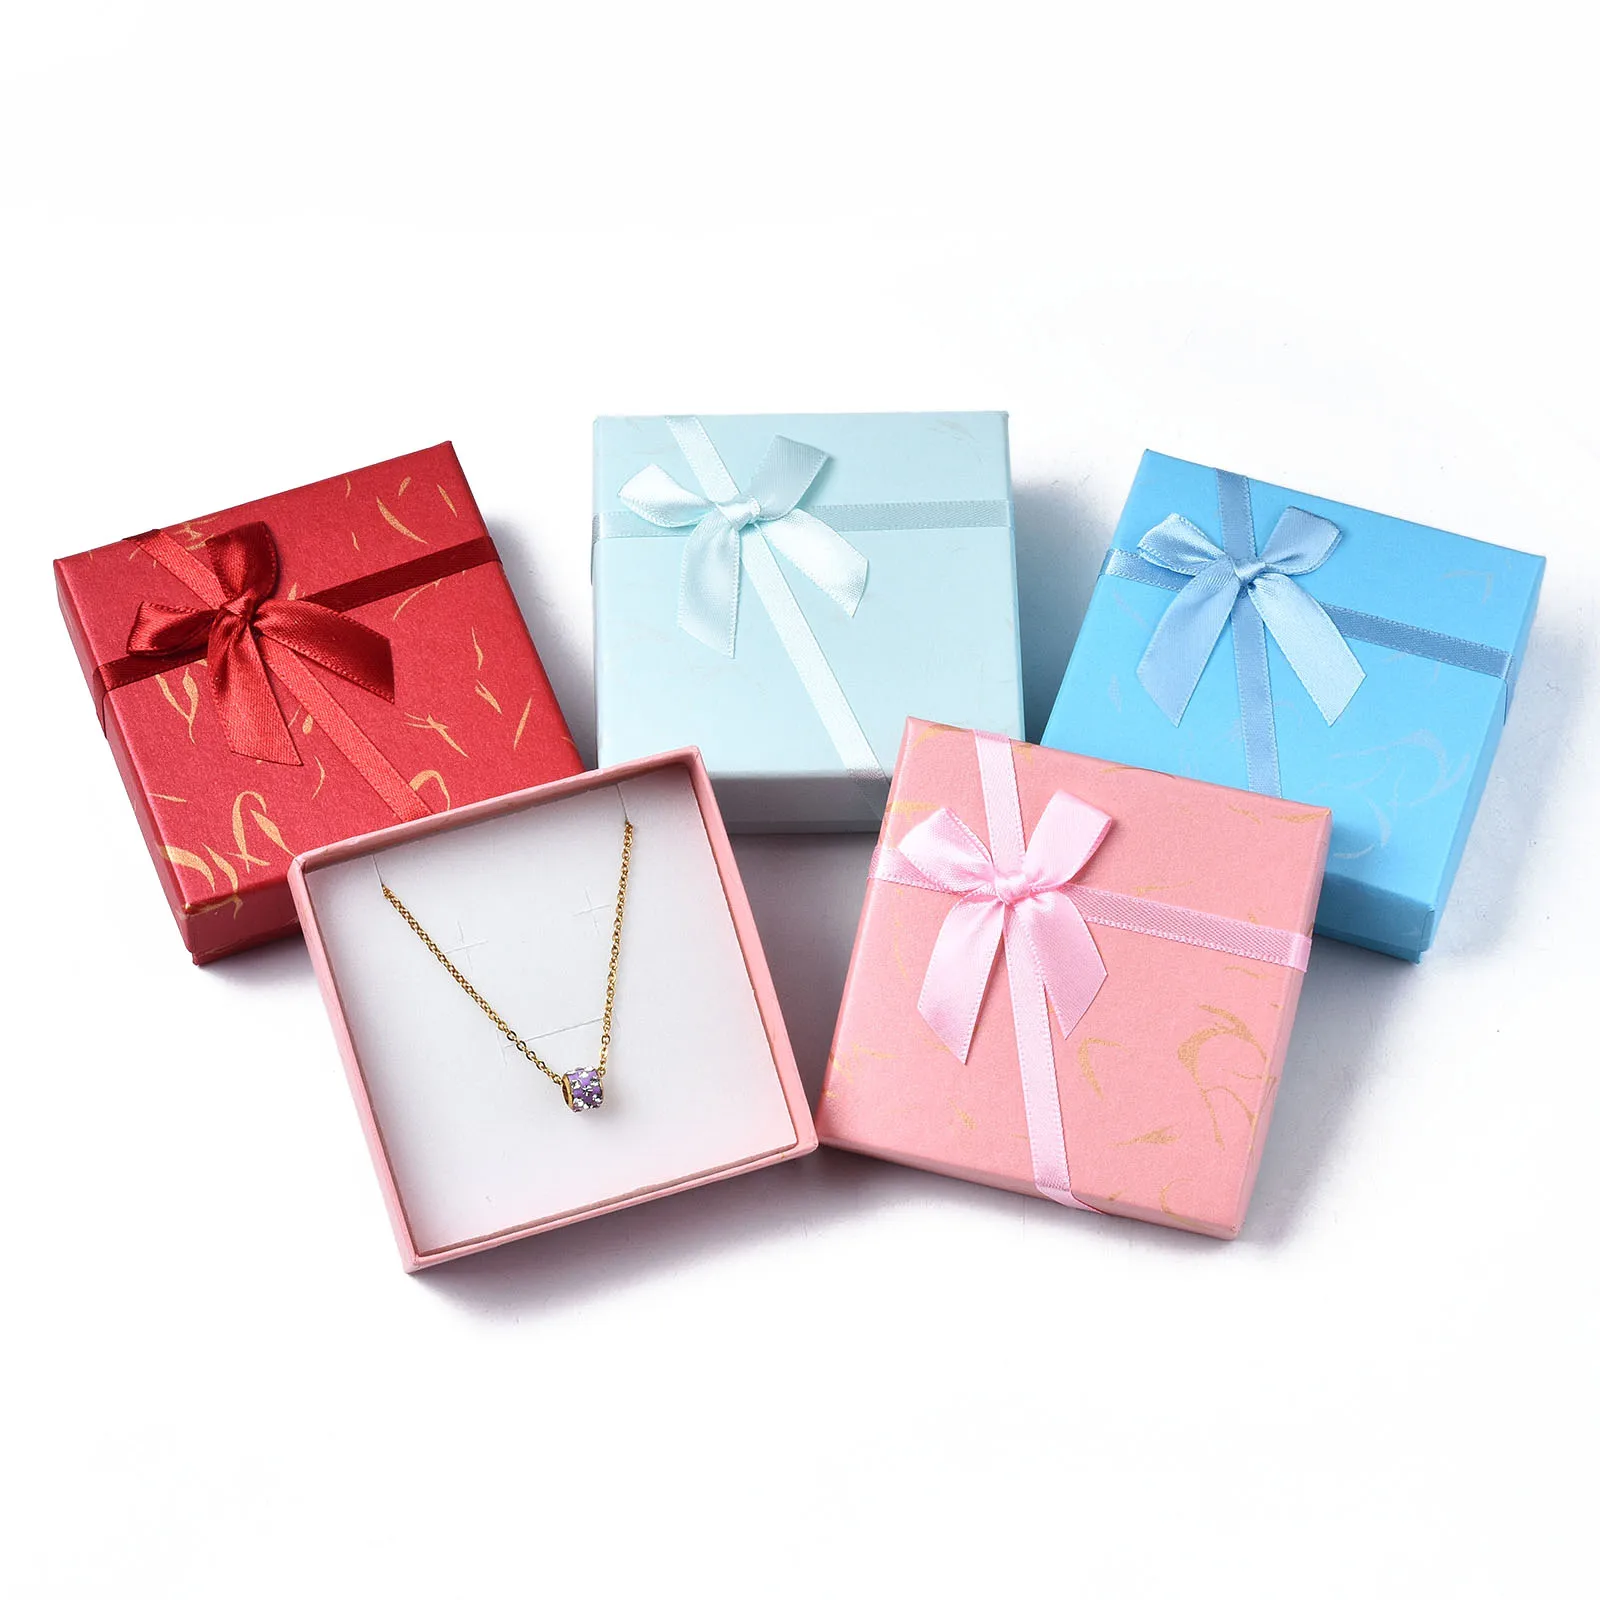 12pcs Square Jewelry Set Cardboard Box Mixed Color with Bowknot Gift Box For Necklaces Earrings Rings DIY Packaging 9x9x3cm pandahall 12pcs jewelry set box square gift box with bowknot for necklaces earrings rings packaging mixed color 9x9x3cm 9x7x3cm